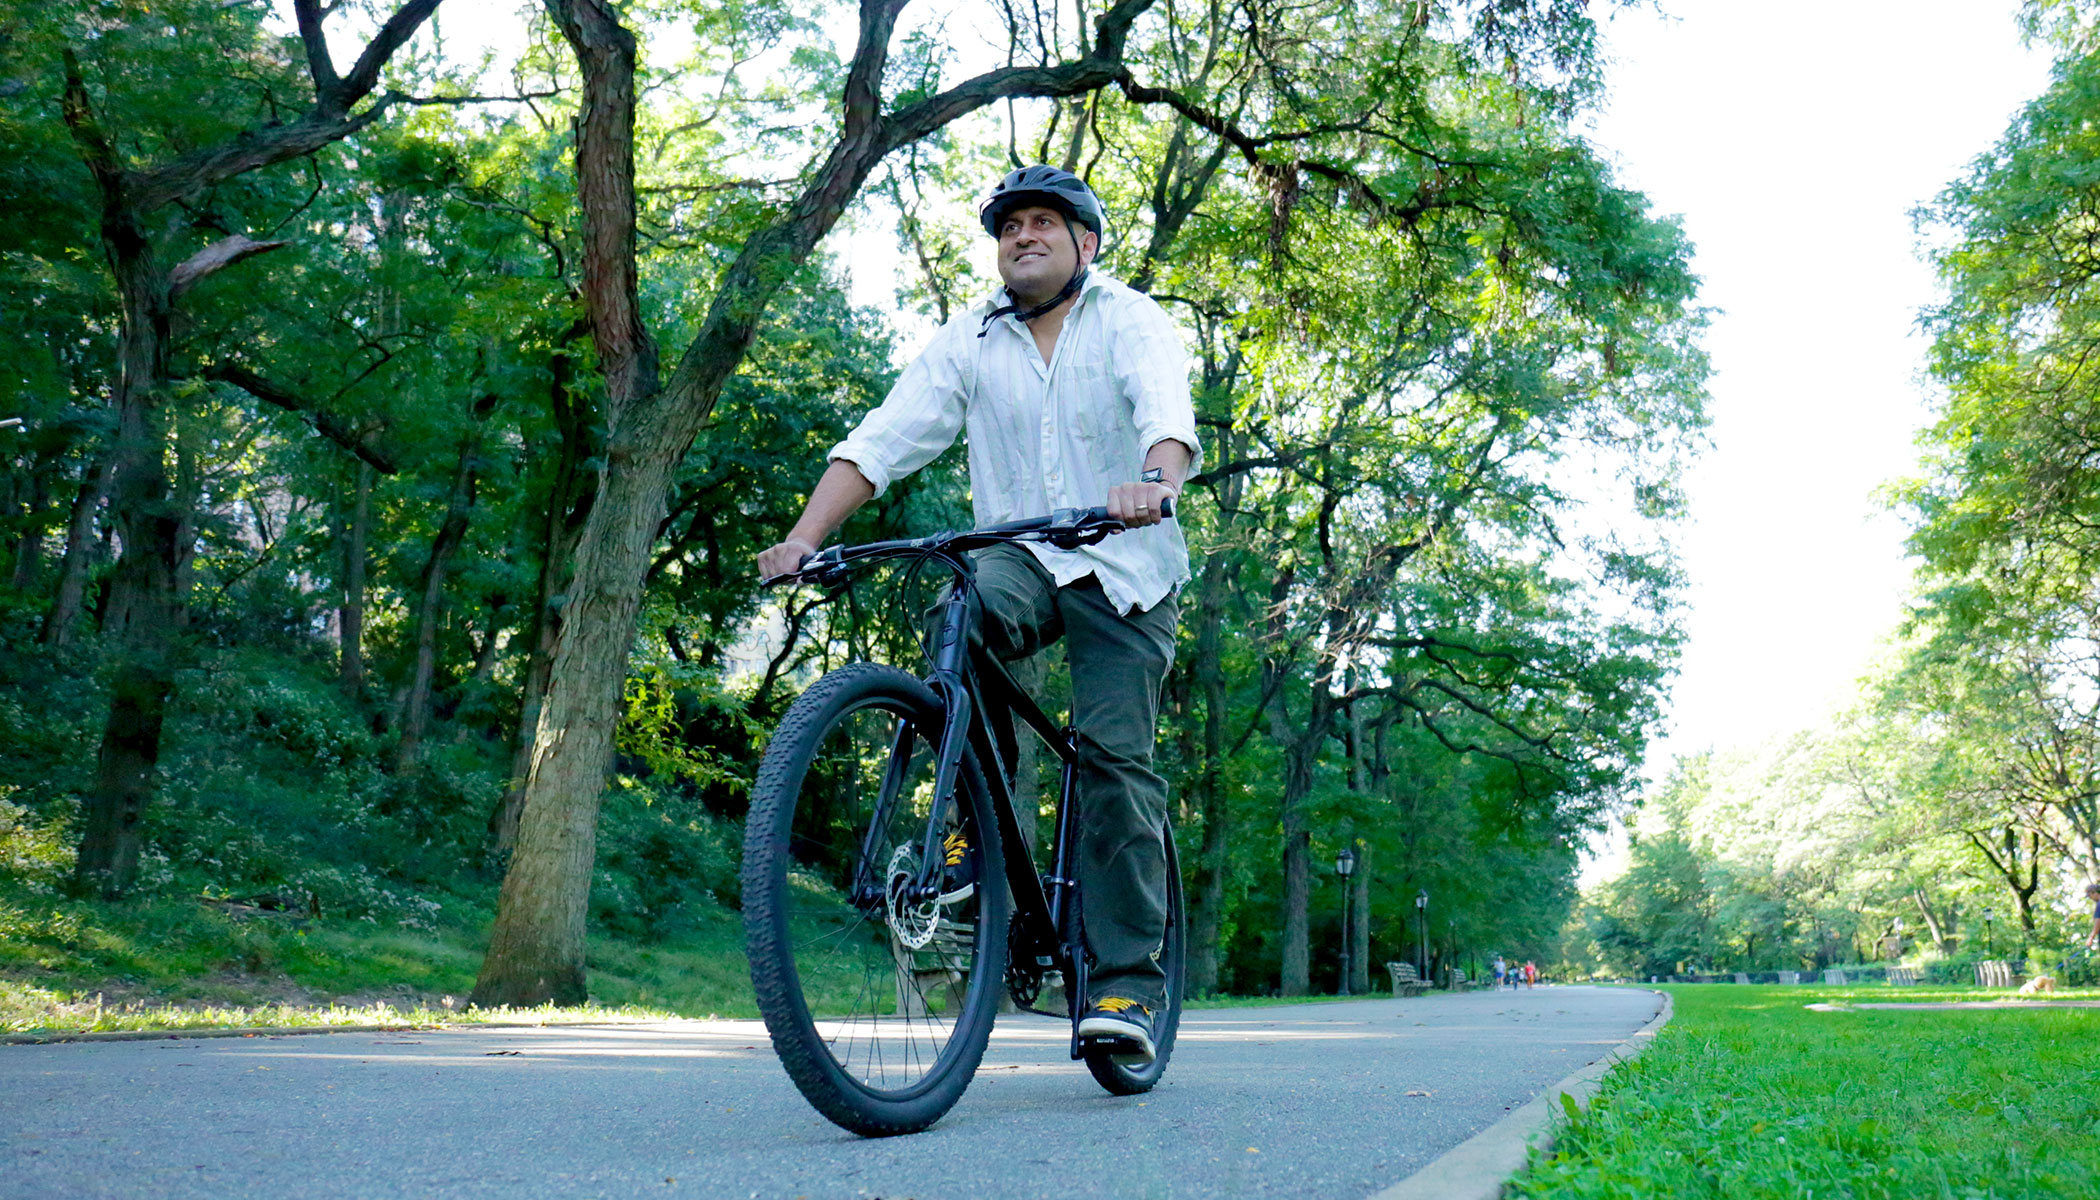 A man rides a bike wearing a helmet. Green trees are in the background.